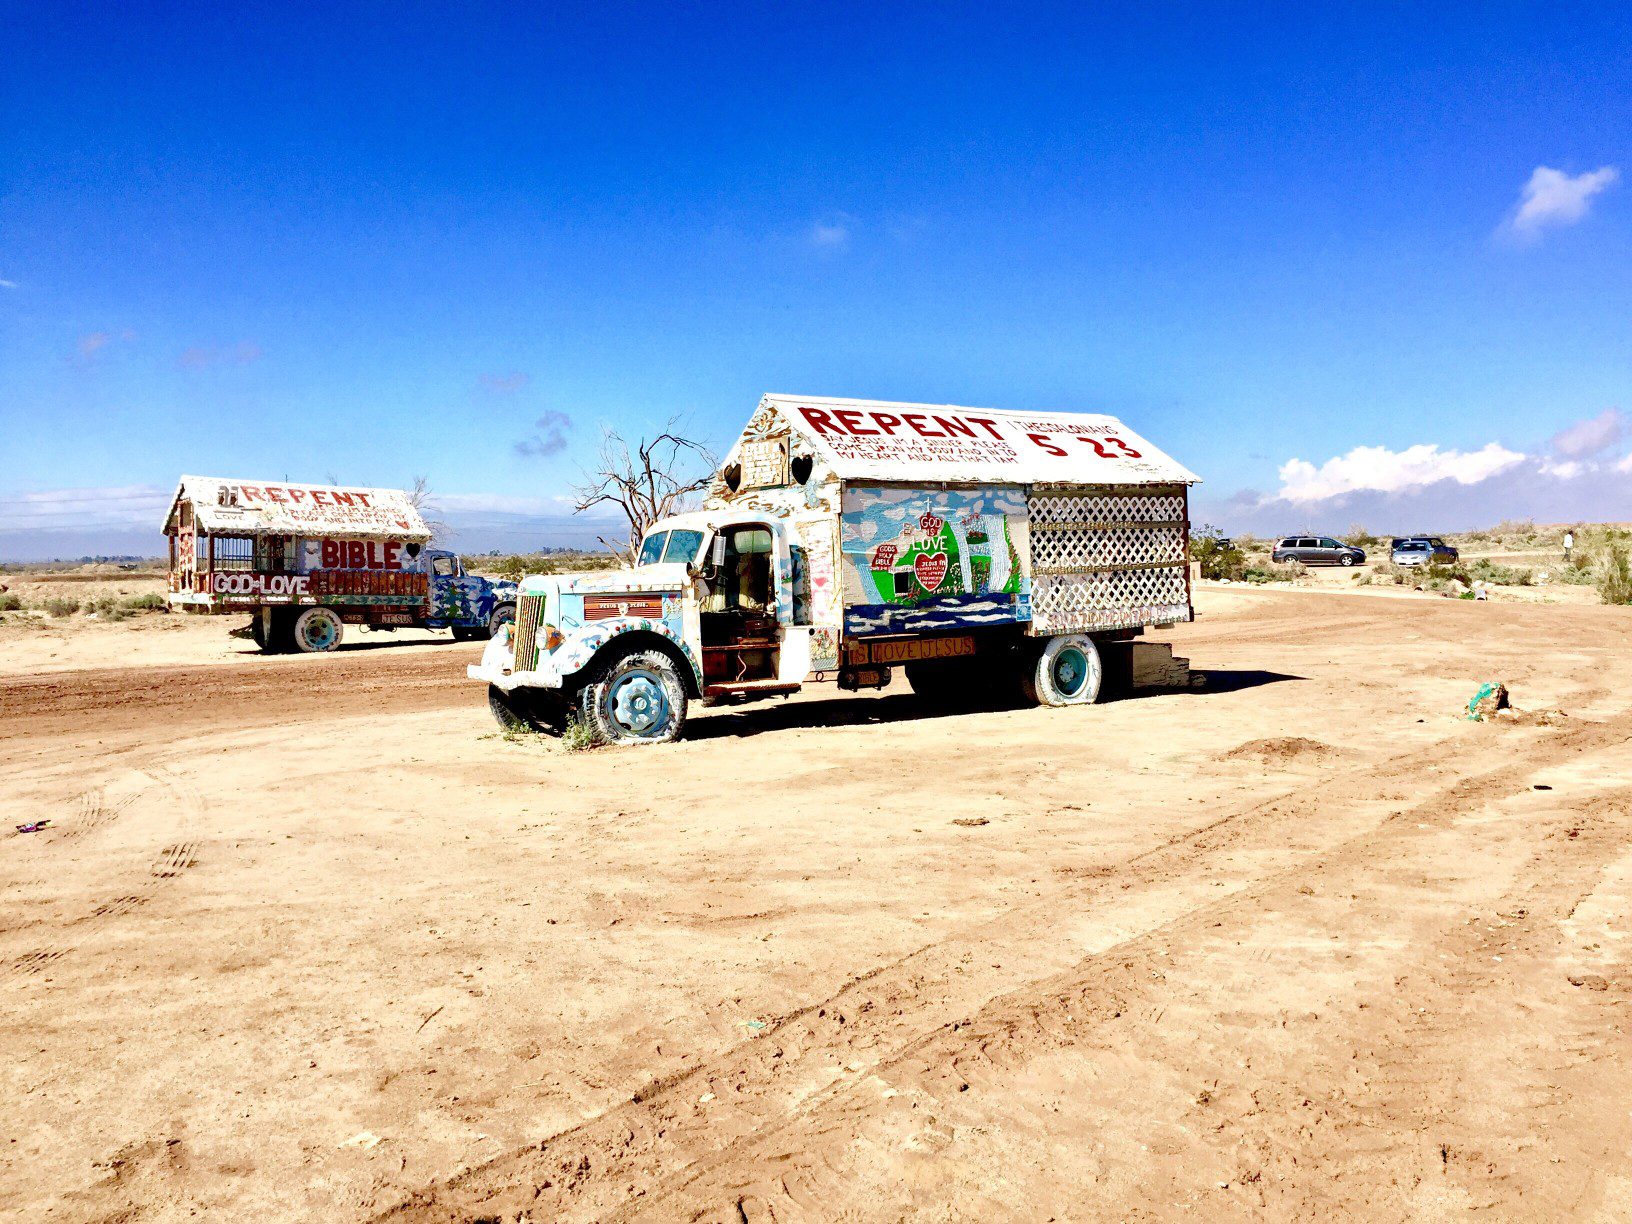 Is It Legal to Camp at Lawless Slab City?